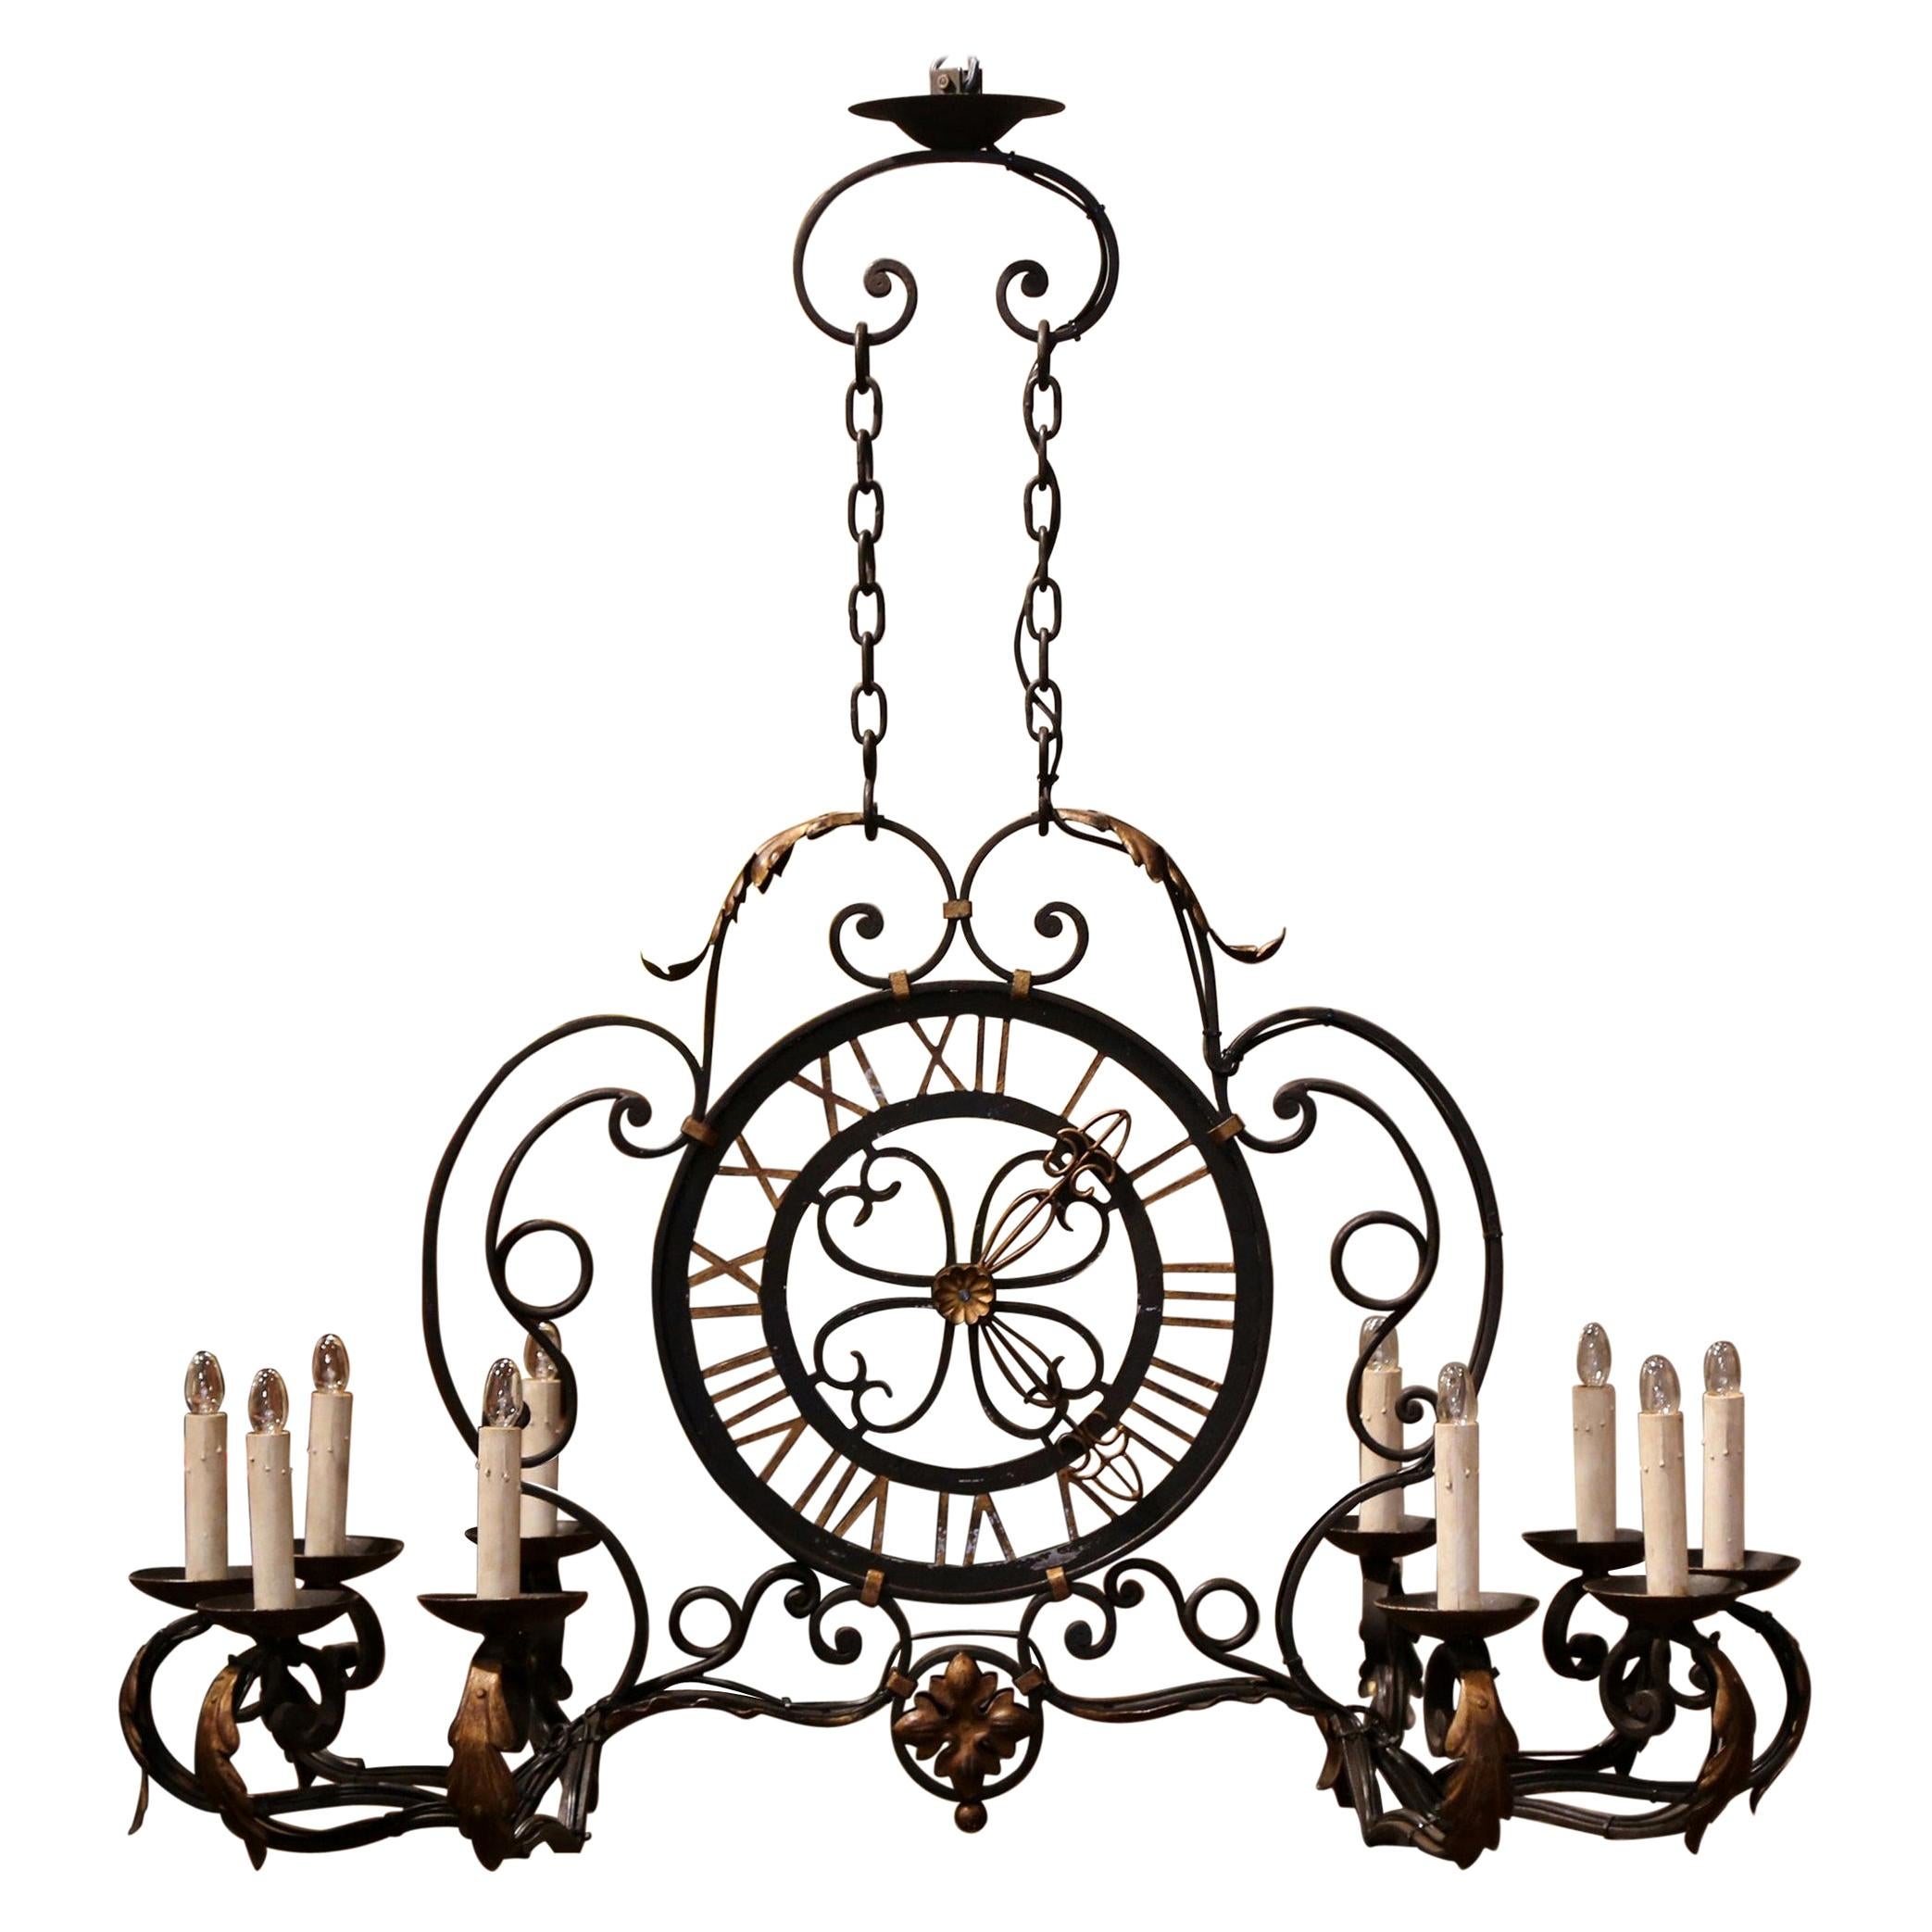 Early 20th Century French Painted and Gilt Iron Ten-Light Clock Chandelier